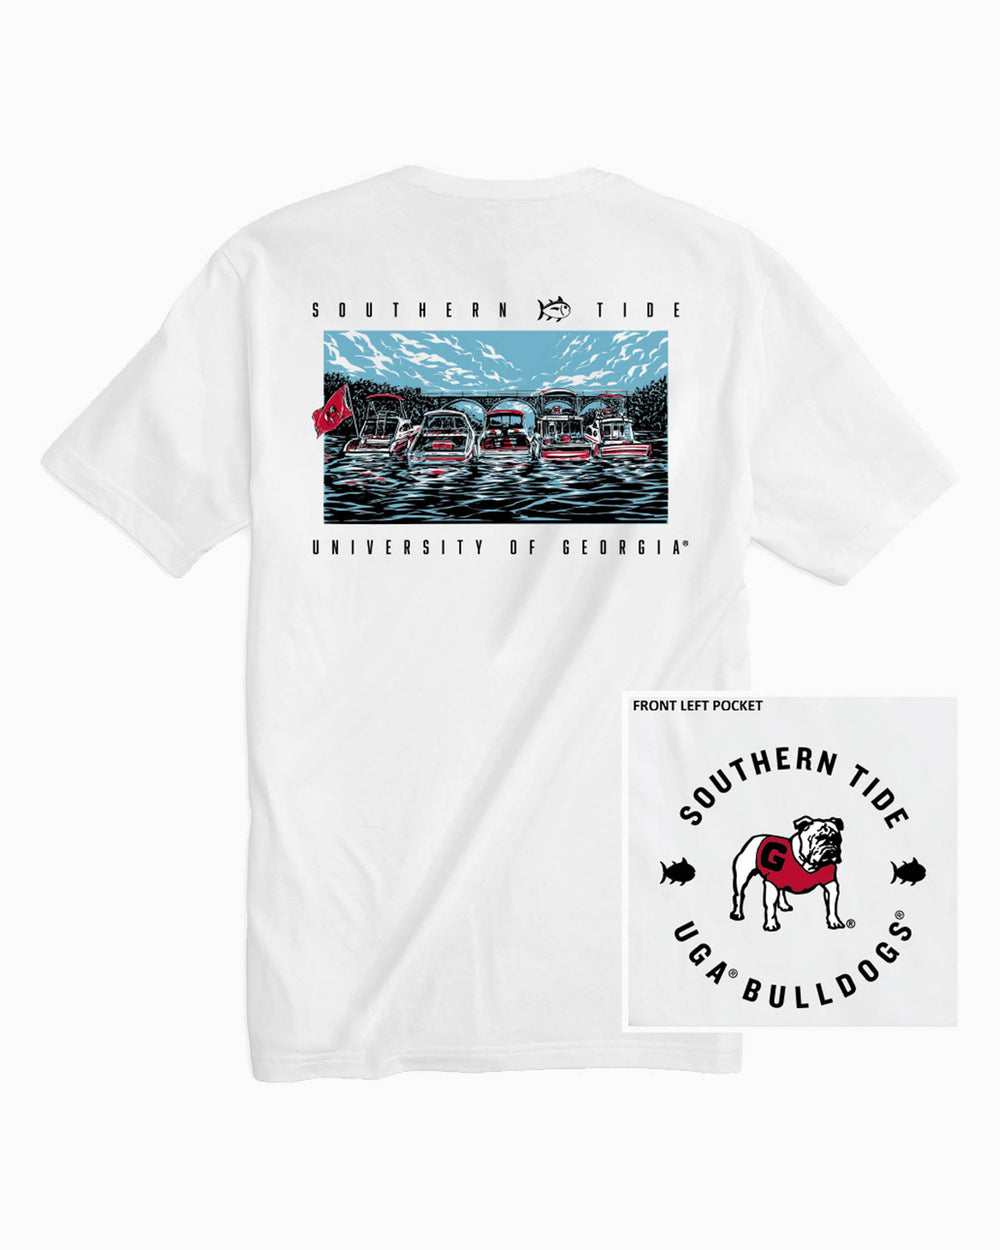 The front and back of the Georgia Bulldogs Tailgate Cove T-Shirt by Southern Tide - Classic White